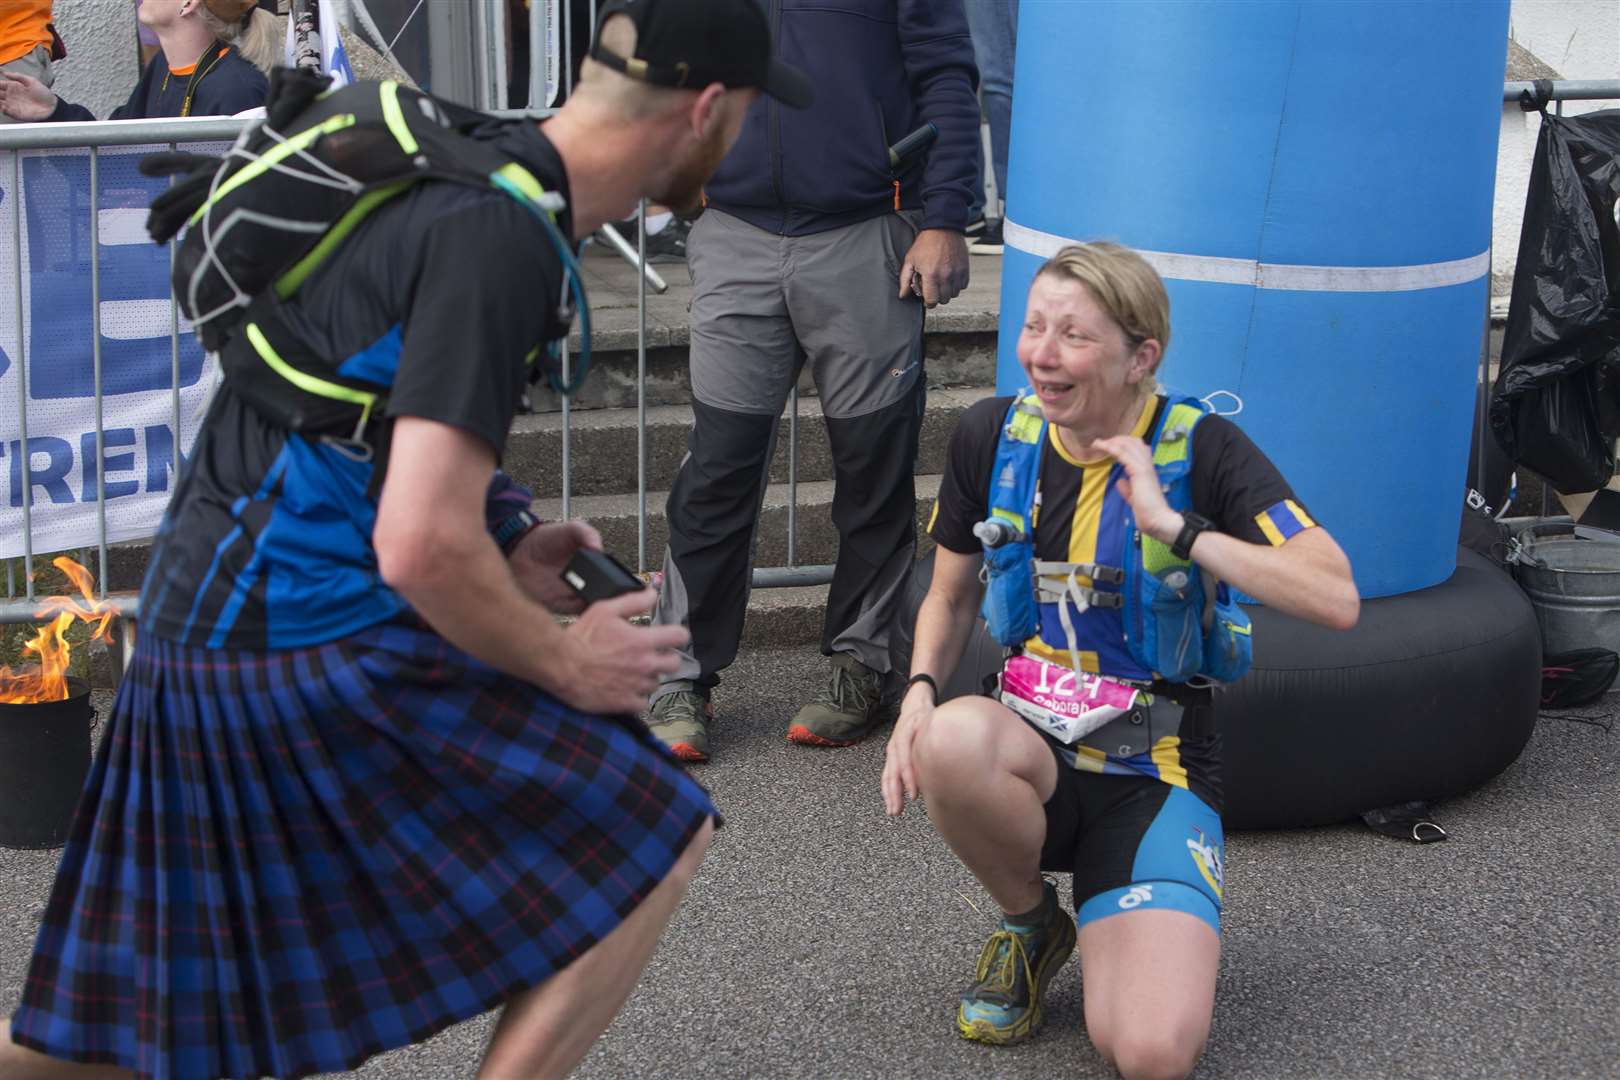 Thurso woman, Debbie Larnach was already emotional having just completed her first Celtman Extreme Scottish Triathlon, in Wester Ross at the weekend, but the emotions got even greater when her partner of six years, Steven Munro, got down on one knee at the finishing line and proposed to her. Debbie said, " It was a complete surprise I never ever though we would be married". But Steven, a scaffolder at Dounreay, had been planning the proposal for some time. Debbie was going to take part in the Canadaman Extreme Triathlon in Canada last year and Steven had planned to pop the question there. But his plans were thwarted when Debbie had to postpone her participation in that event. The couple have five children between them and Steven explained it had all worked out for the best, "If we had gone to Canada it would just have been the two of us, but this worked out better as the children could all be at the finish line at Torrodon and share in the moment." Photo: Robert MacDonald/Northern Studios